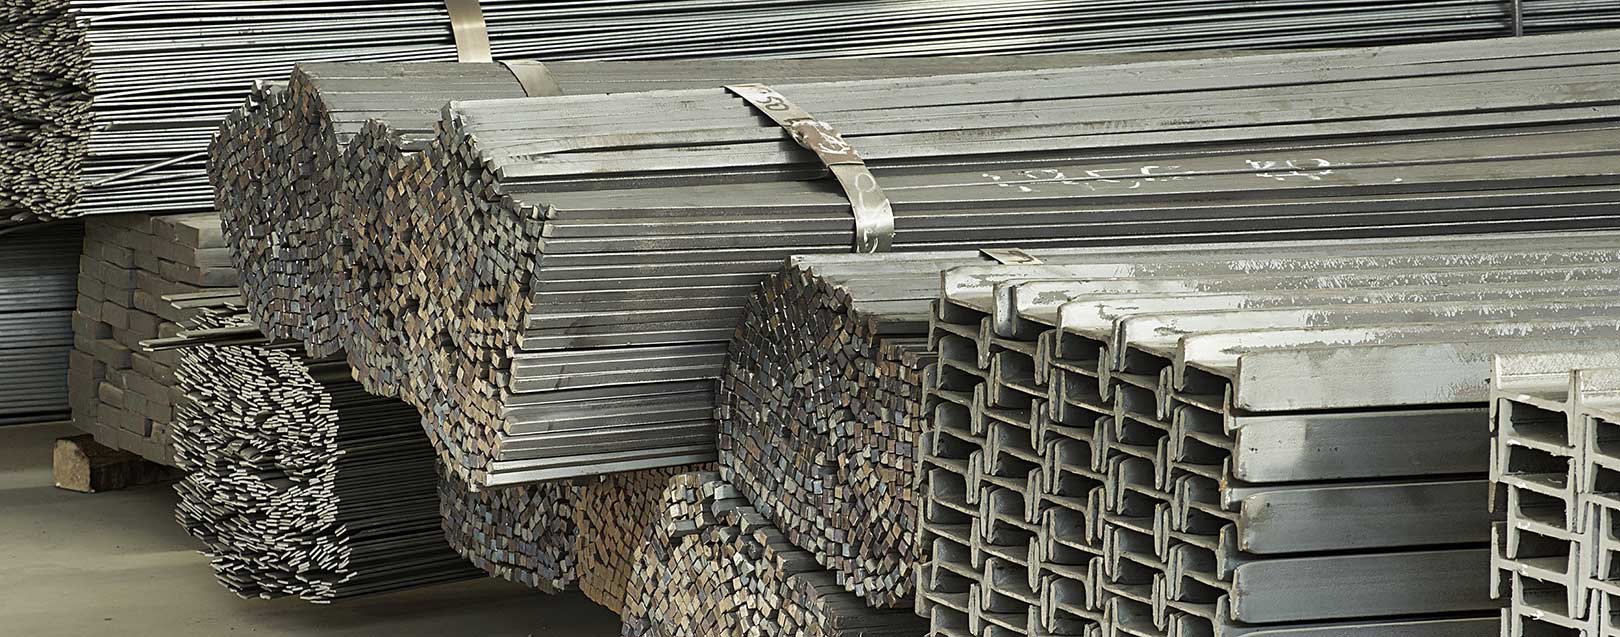 Govt imposes anti-dumping duty on steel flat products imports from China, EU